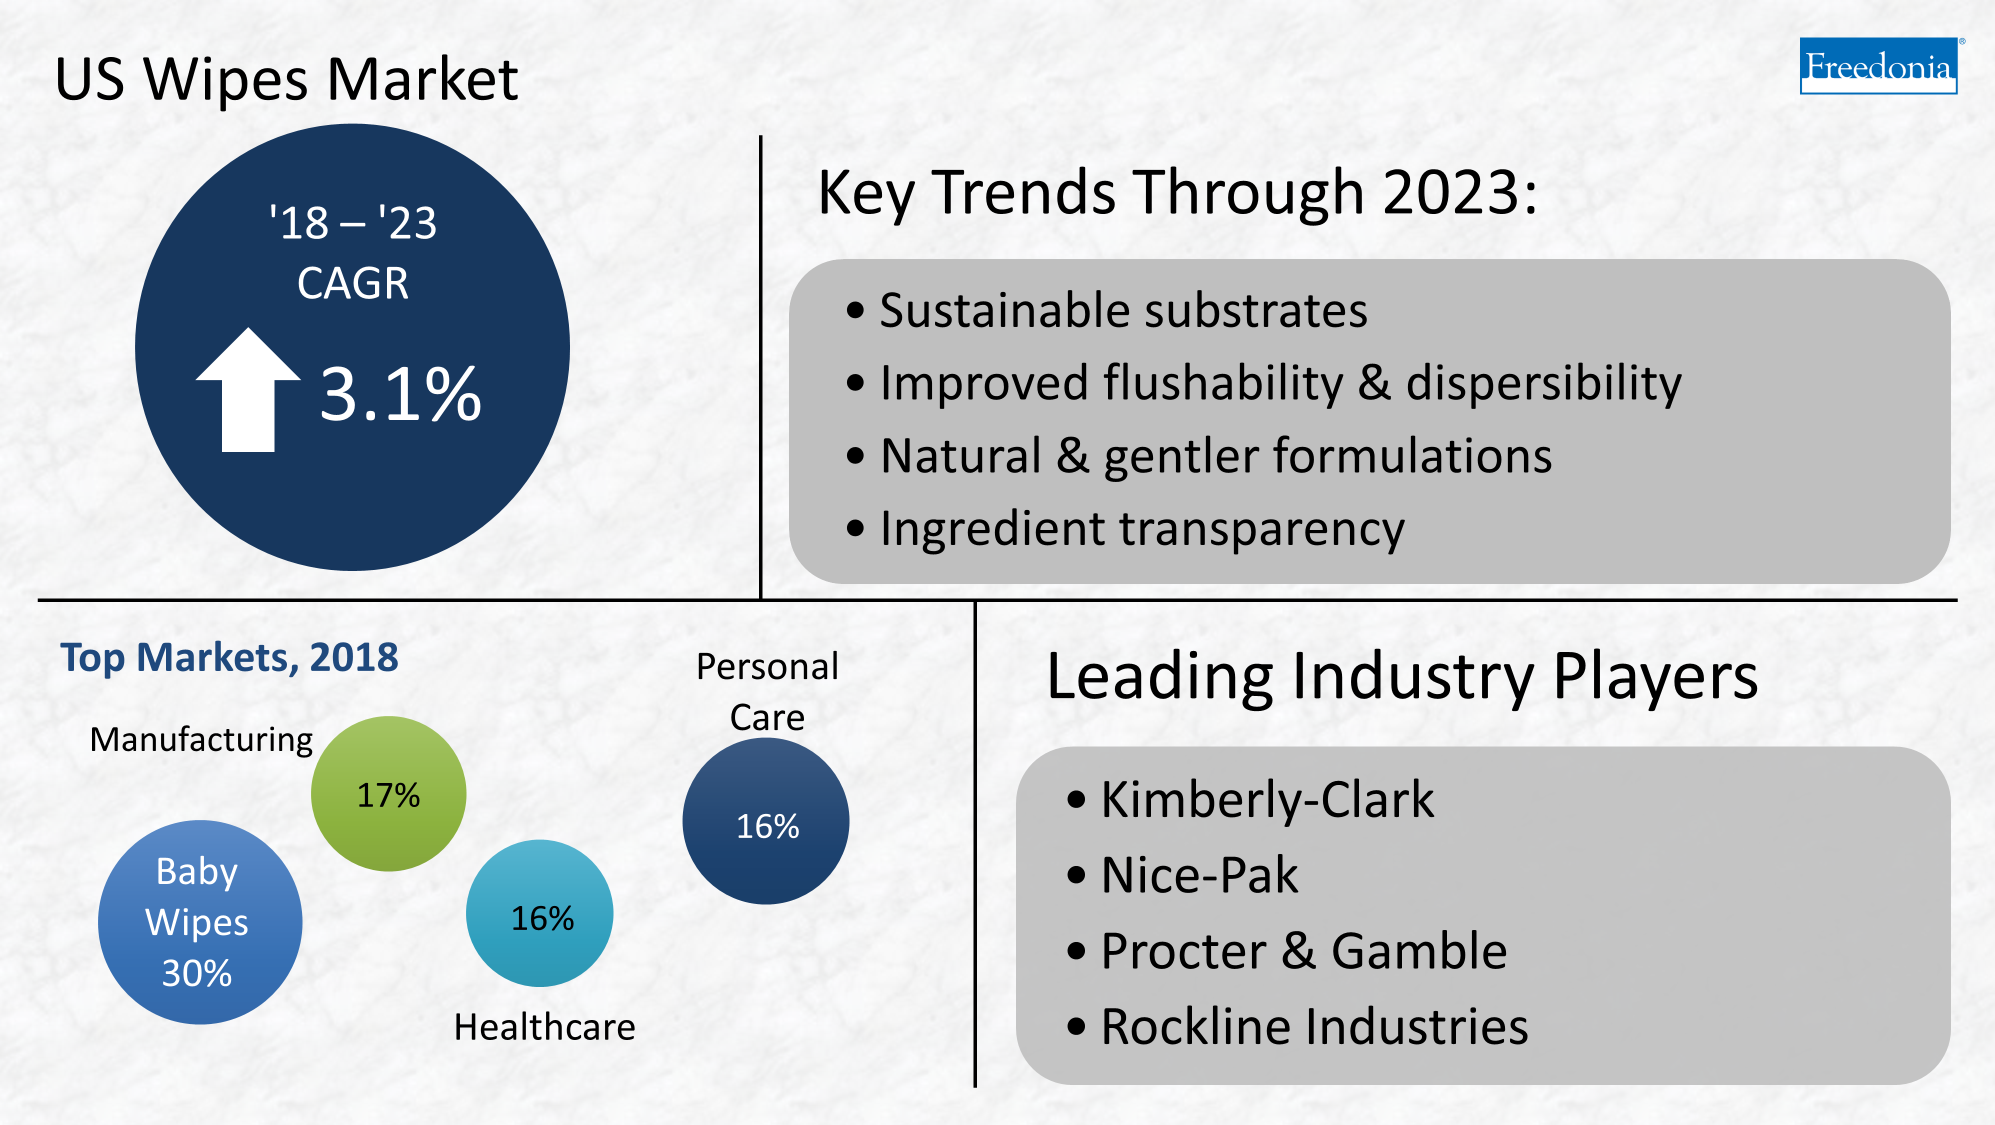 Trends in wipes market through 2023